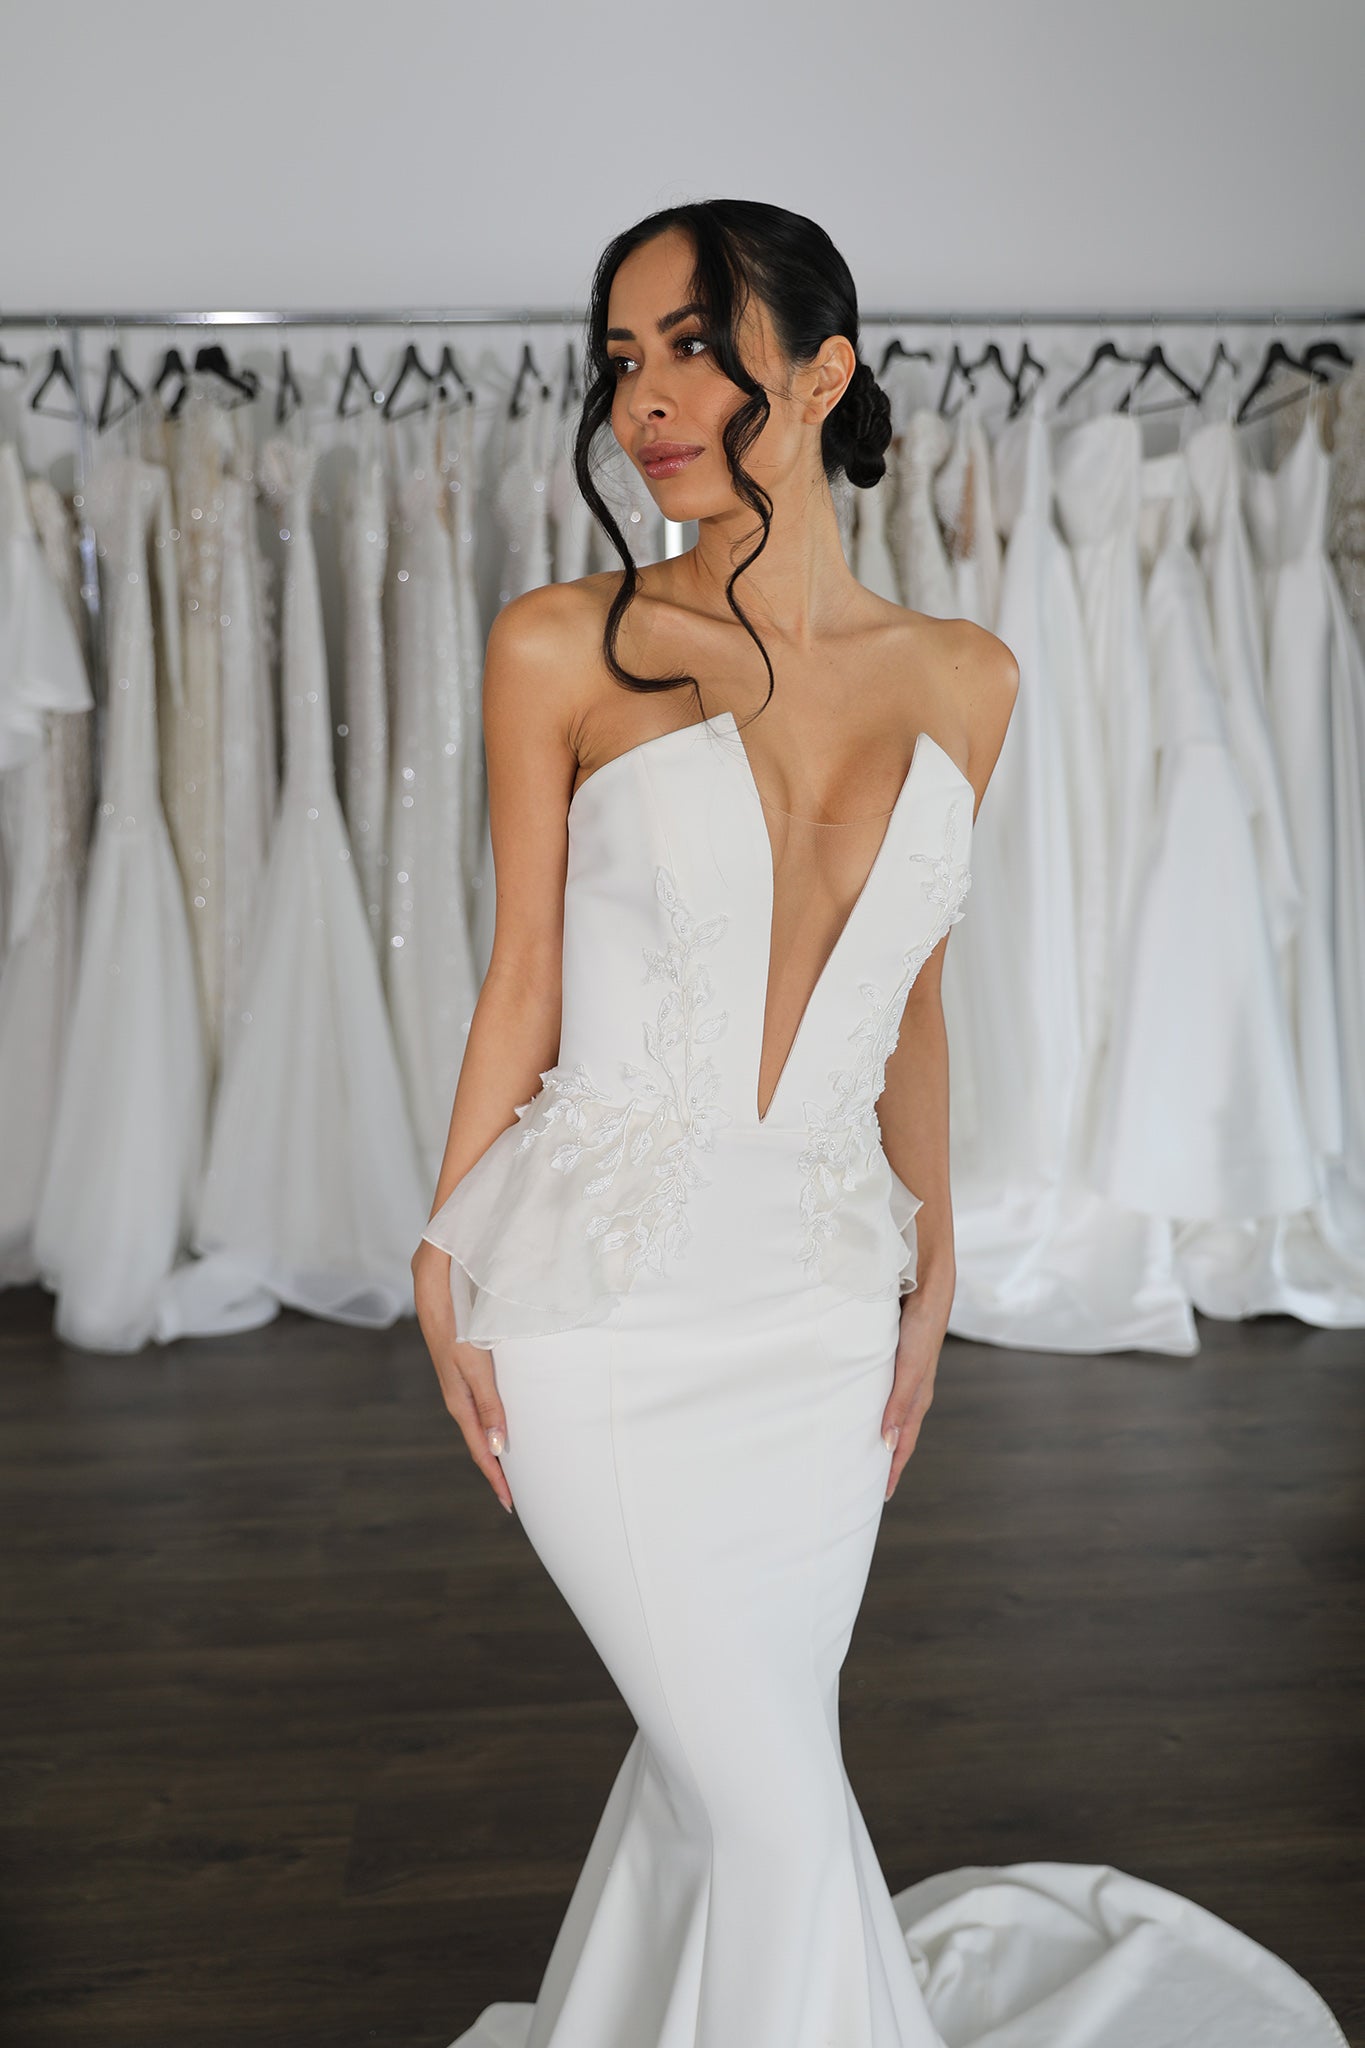 striking plunging v-neckline wedding dress with mermaid skirt and side lace peplums